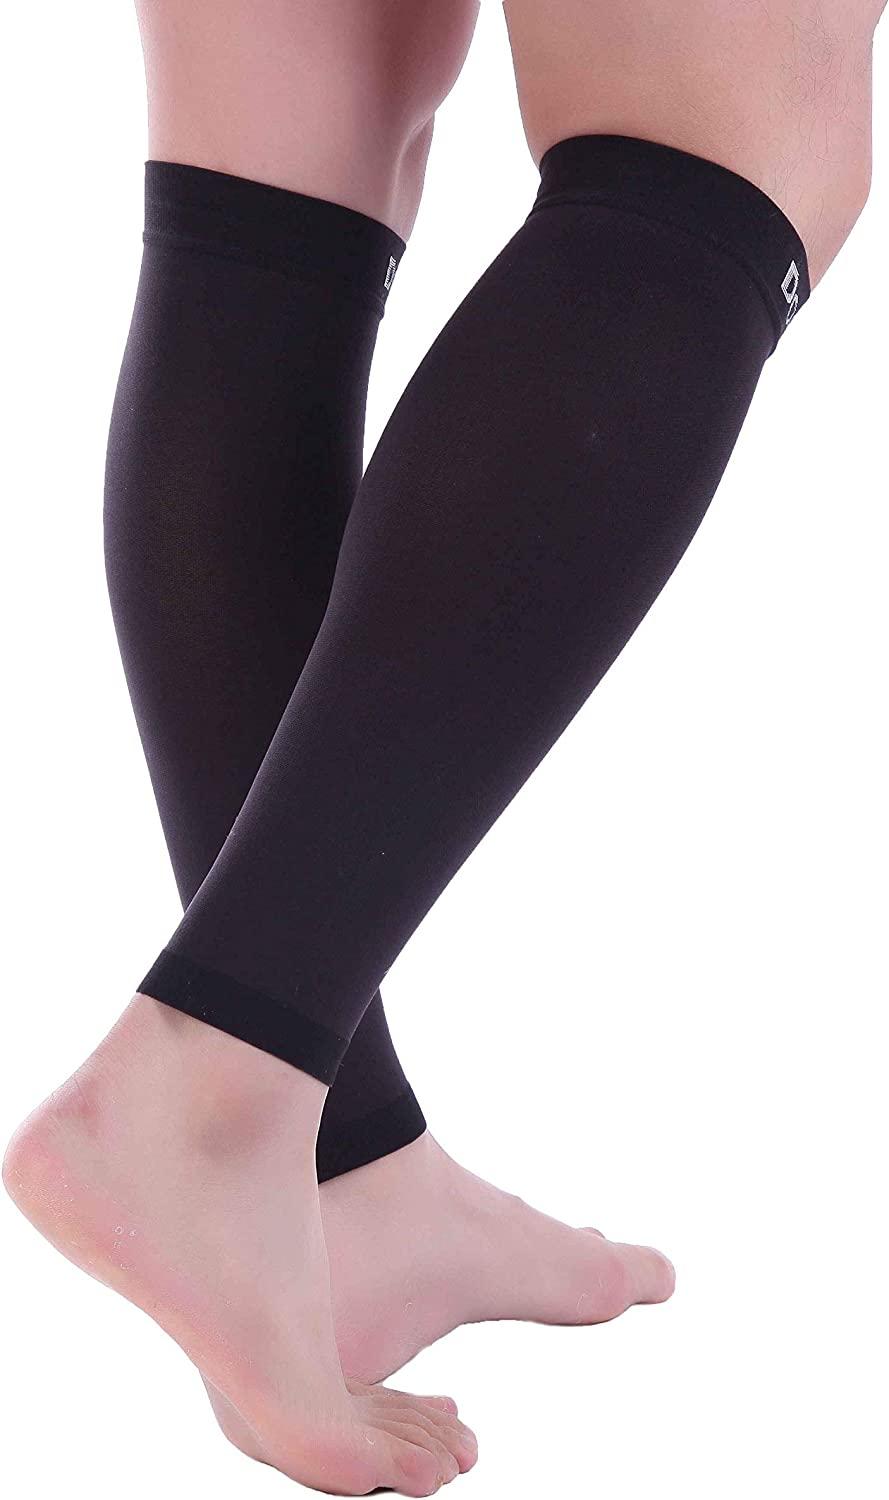  Doc Miller Calf Compression Sleeve Men and Women 20-30